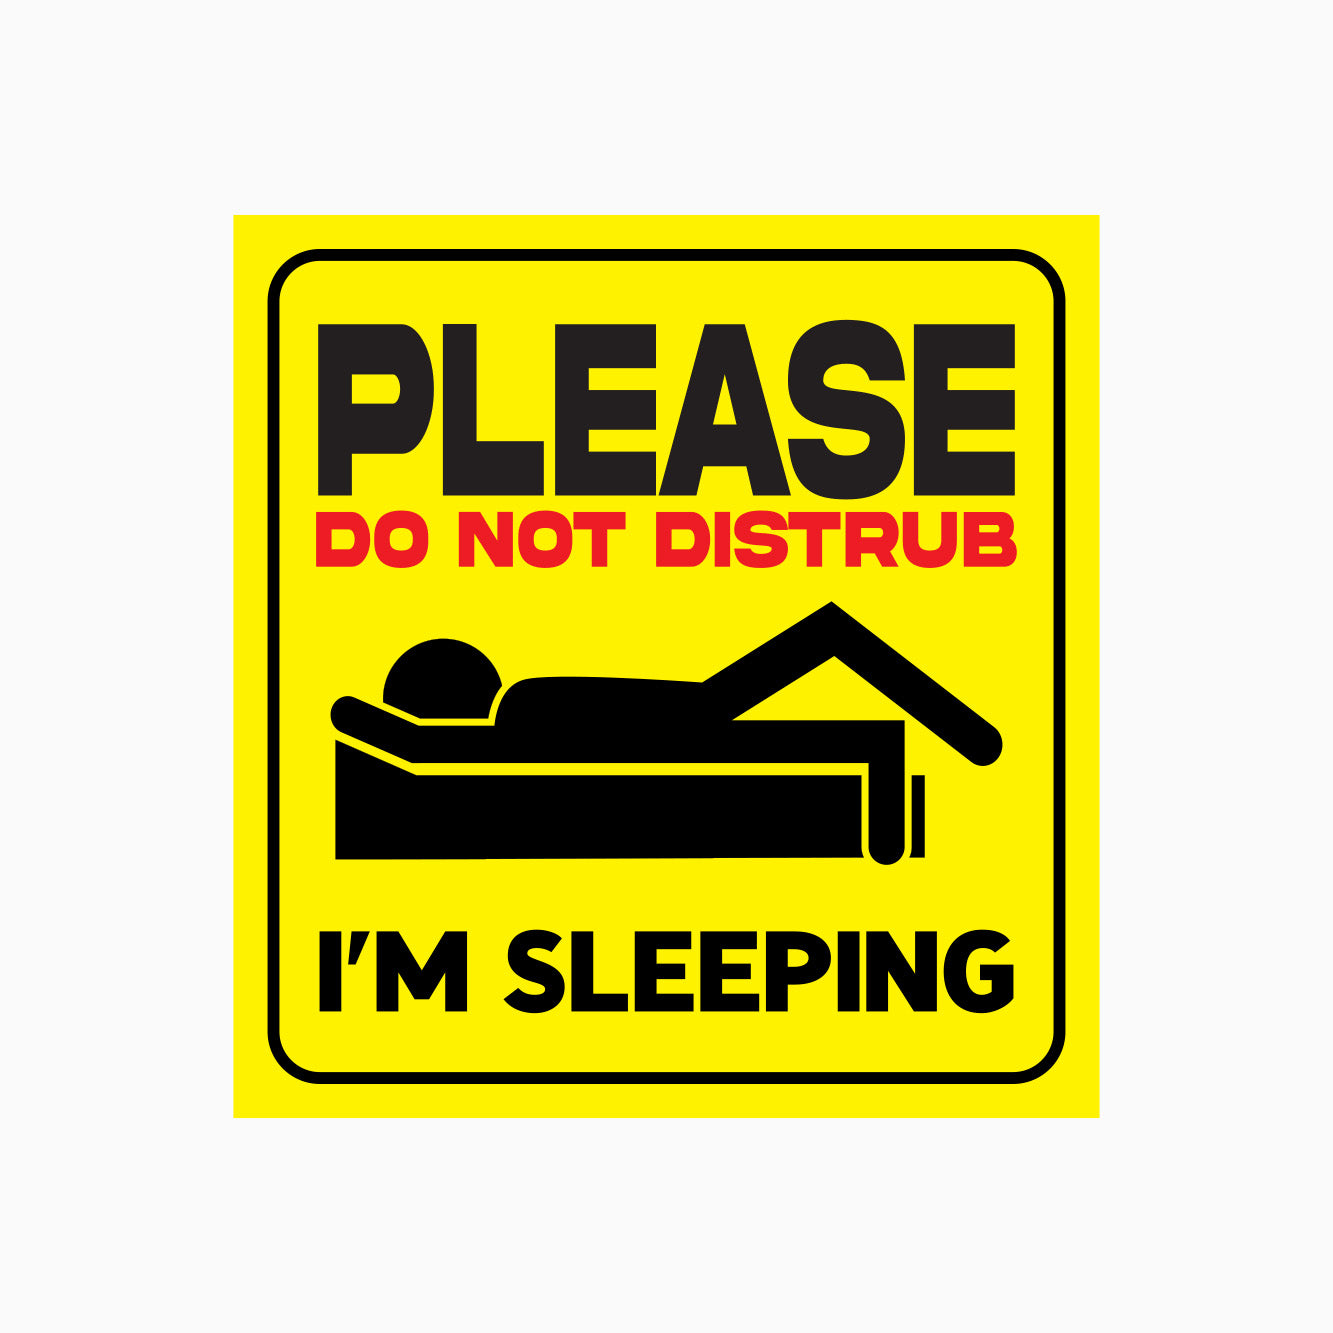 Please do not disturb - I'm Sleeping Sign – Get signs